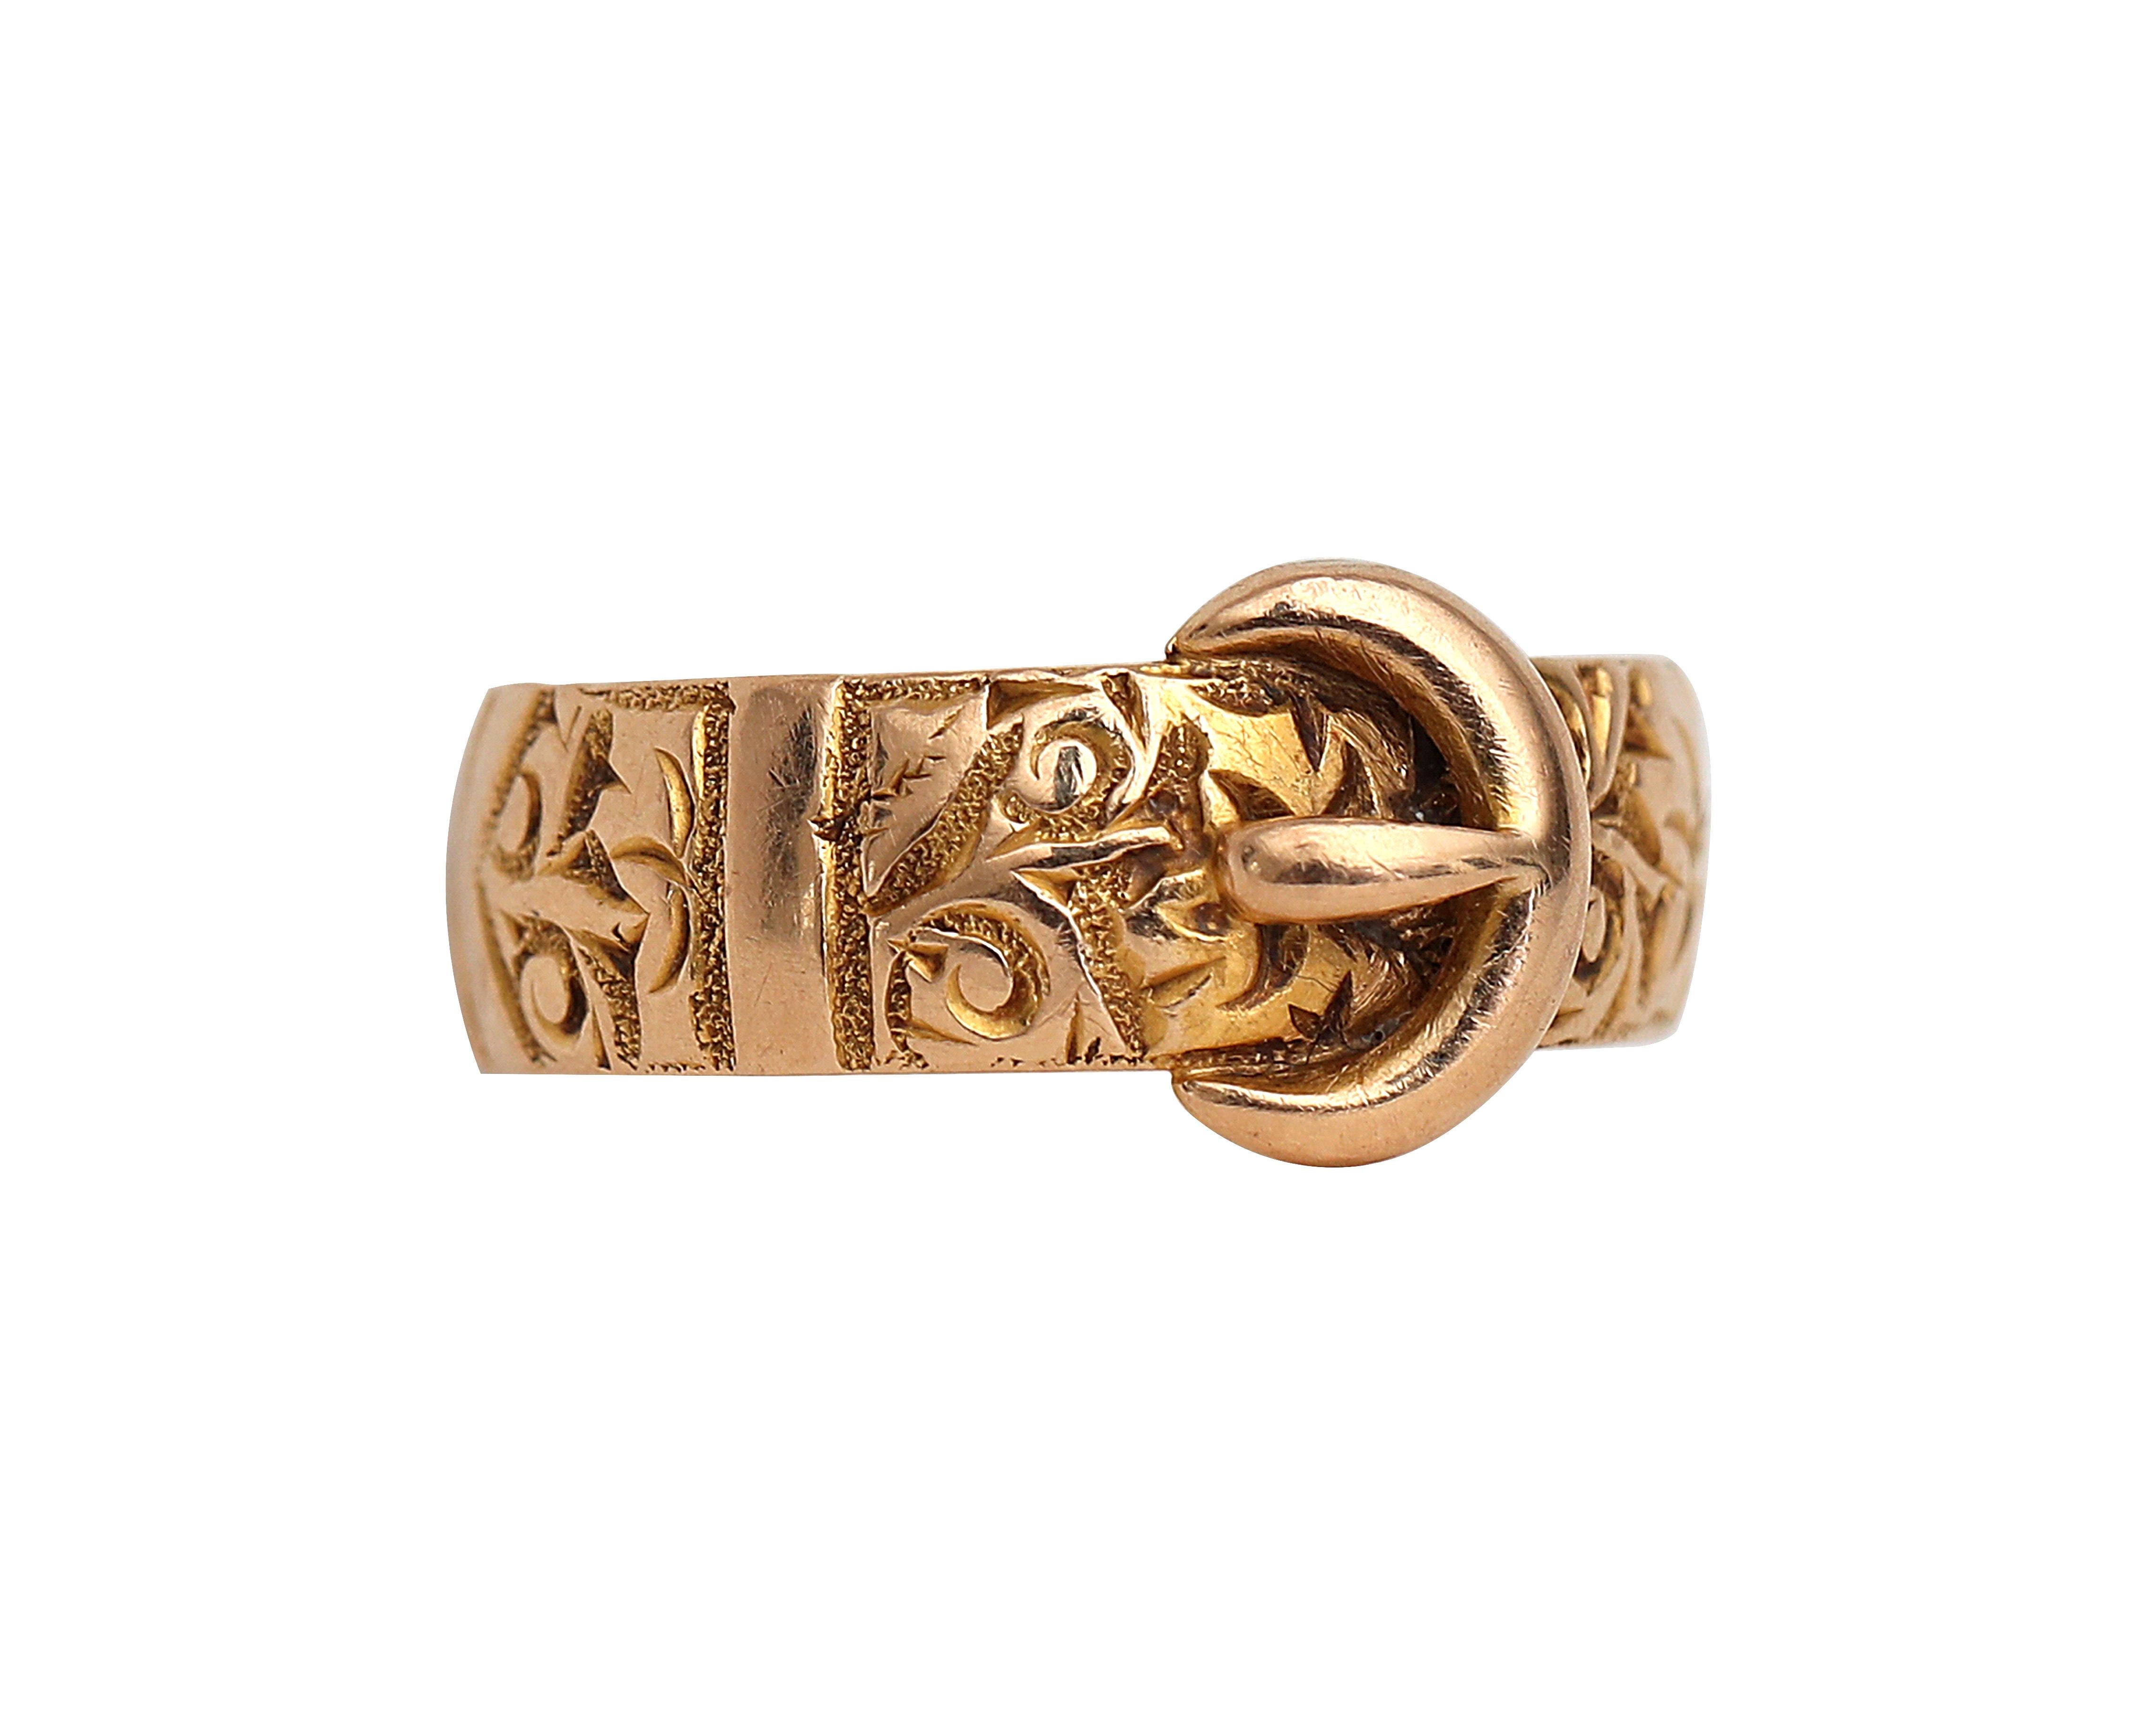 Description: 
So much detail on this unique late Victorian piece! This 18K yellow gold beauty has a hand-carved and etched leafy floral pattern going around the band.The great old British hallmarks indicate it was made by William Henry Coley,